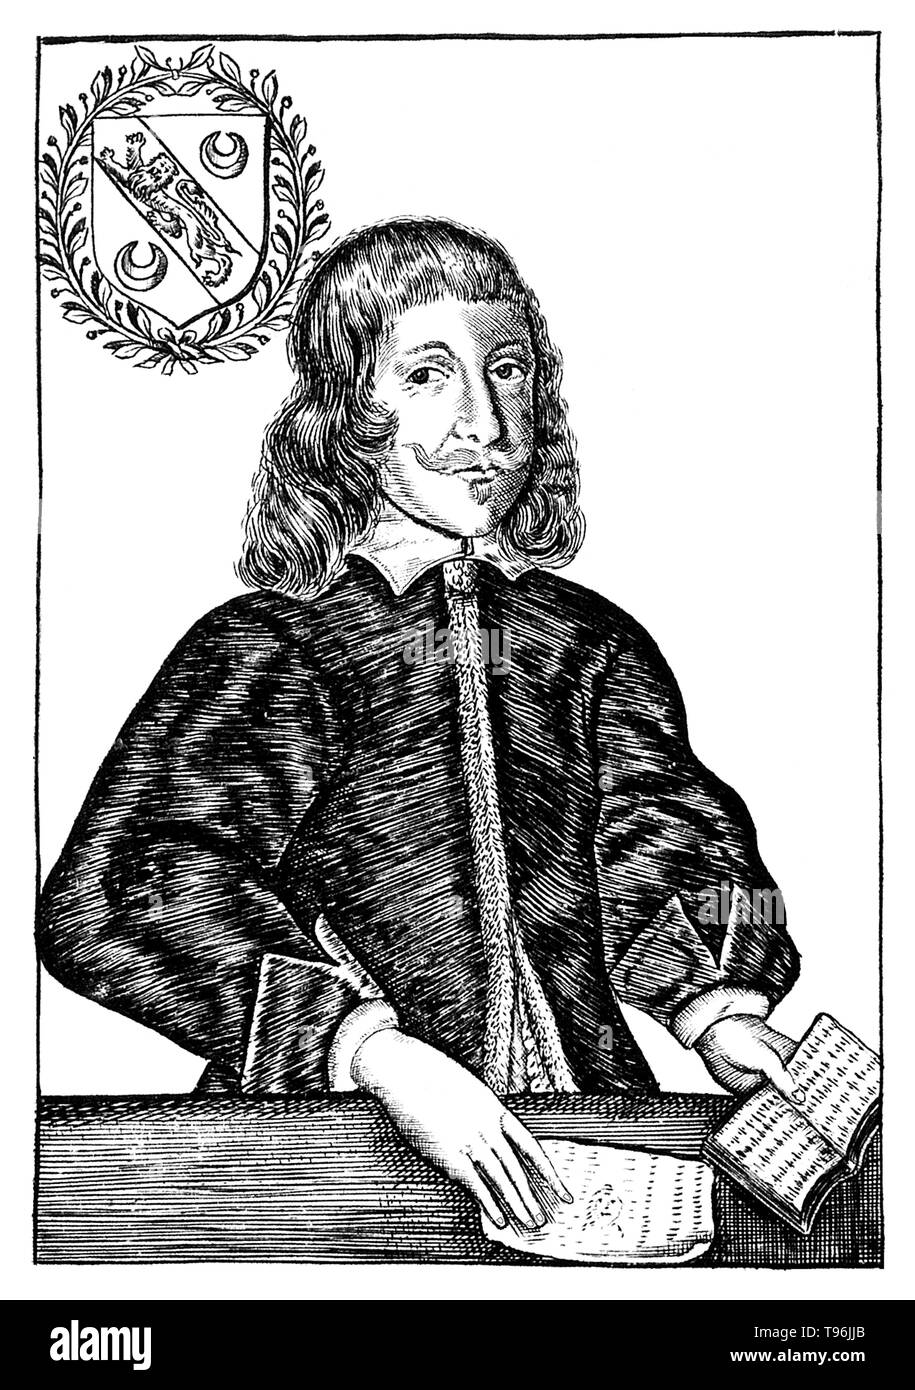 Nicholas Culpeper (October 18, 1616 - January 10, 1654) was an English botanist, herbalist, physician, and astrologer. His published books includes The English Physitian (1652), The Complete Herbal (1653), which contains a rich store of pharmaceutical and herbal knowledge, and Astrological Judgement of Diseases from the Decumbiture of the Sick (1655), which is one of the most detailed documents known on the practice of medical astrology. Stock Photo